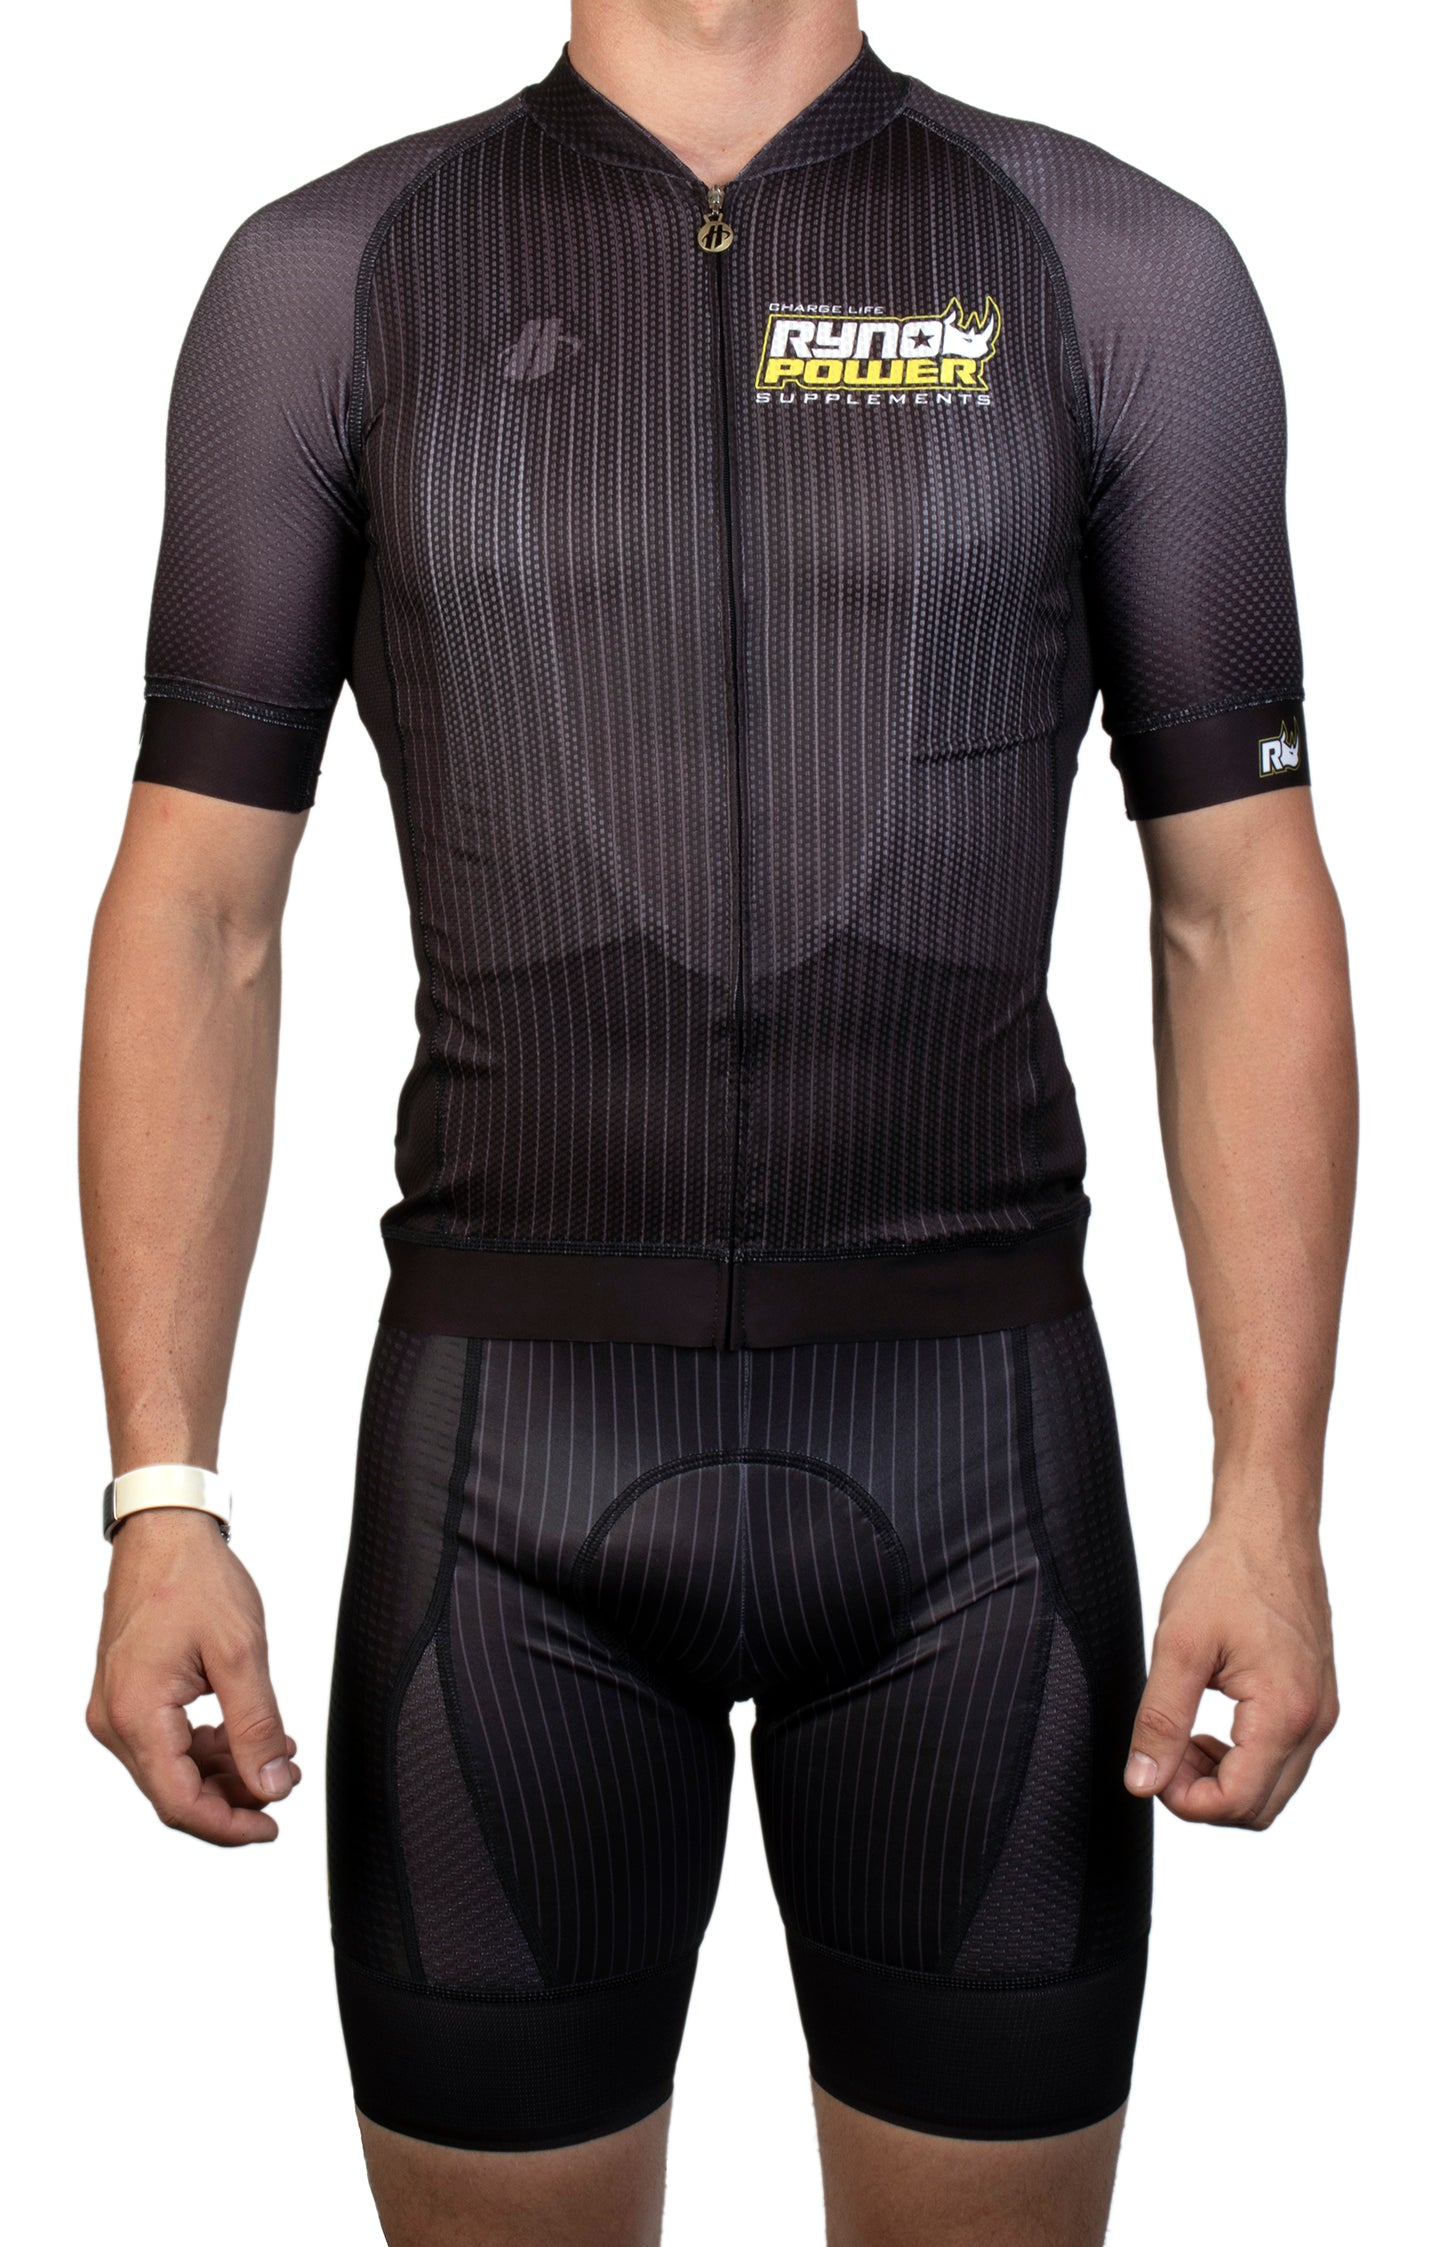 Ryno Power Elite Cycling Kit - Limited Edition Pinstripe Front